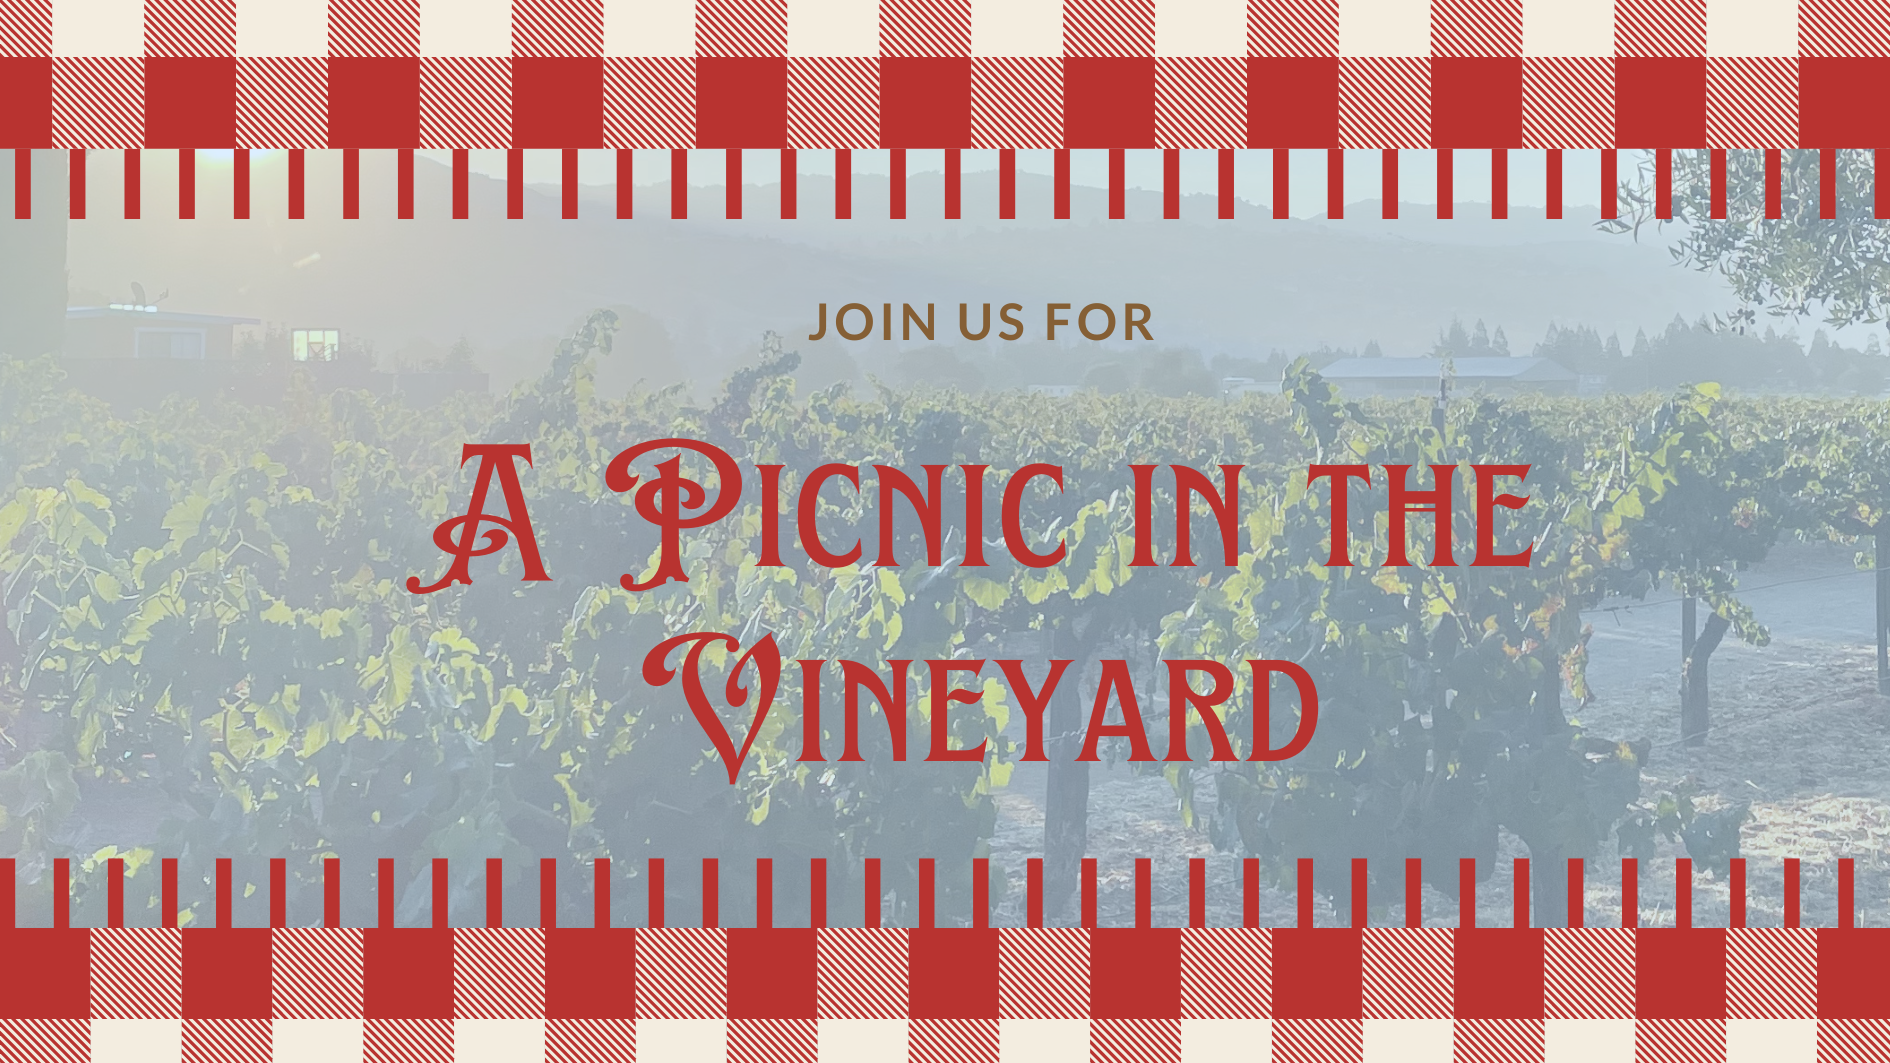 Picnic in the vineyard and live music at Guglielmo Winery